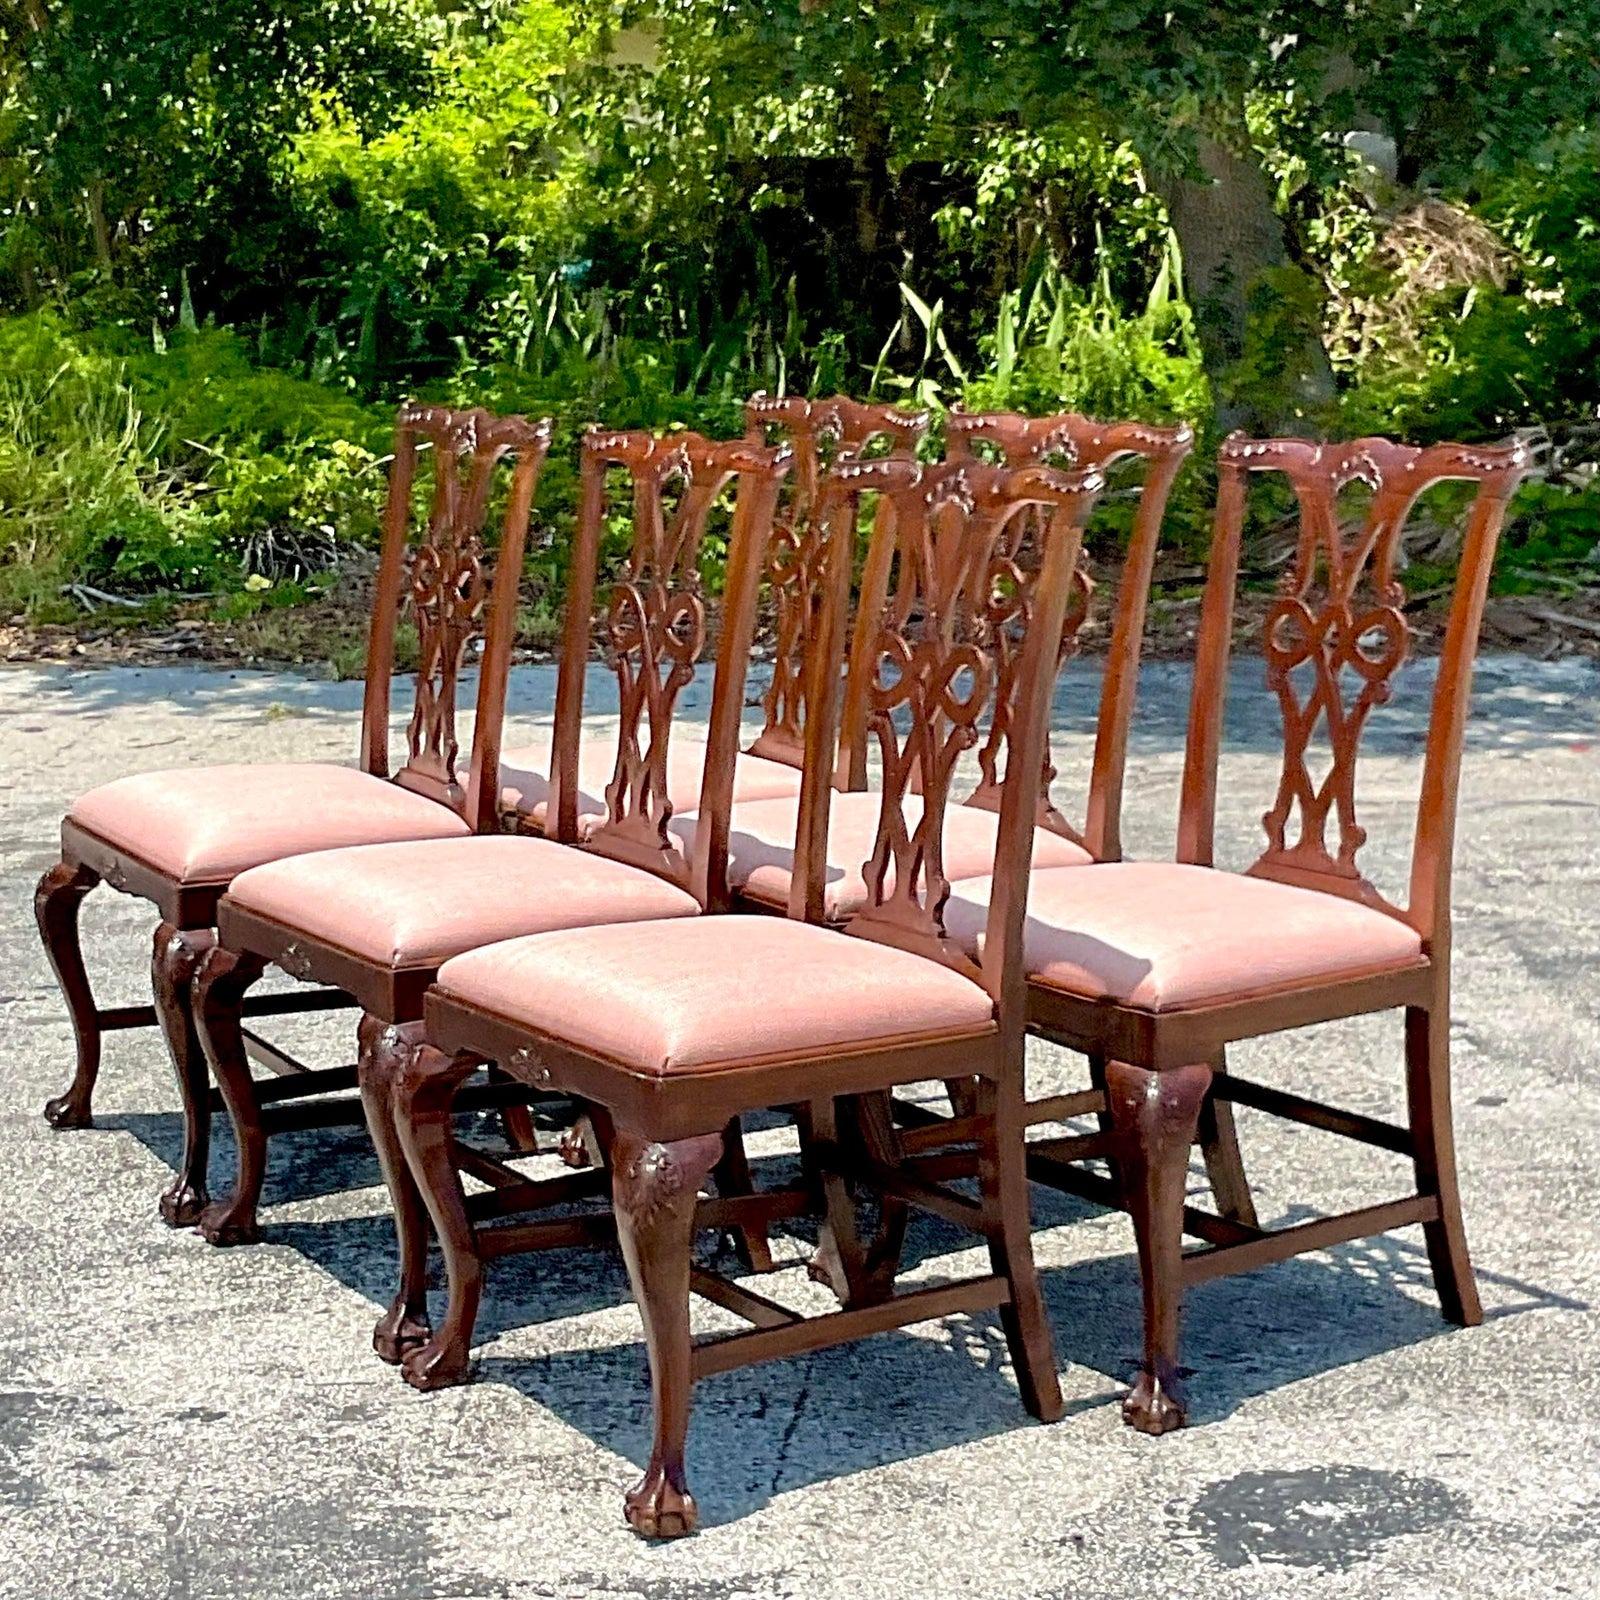 Vintage Regency Carved Ruffle Dining Chairs - Set of 6 In Good Condition For Sale In west palm beach, FL